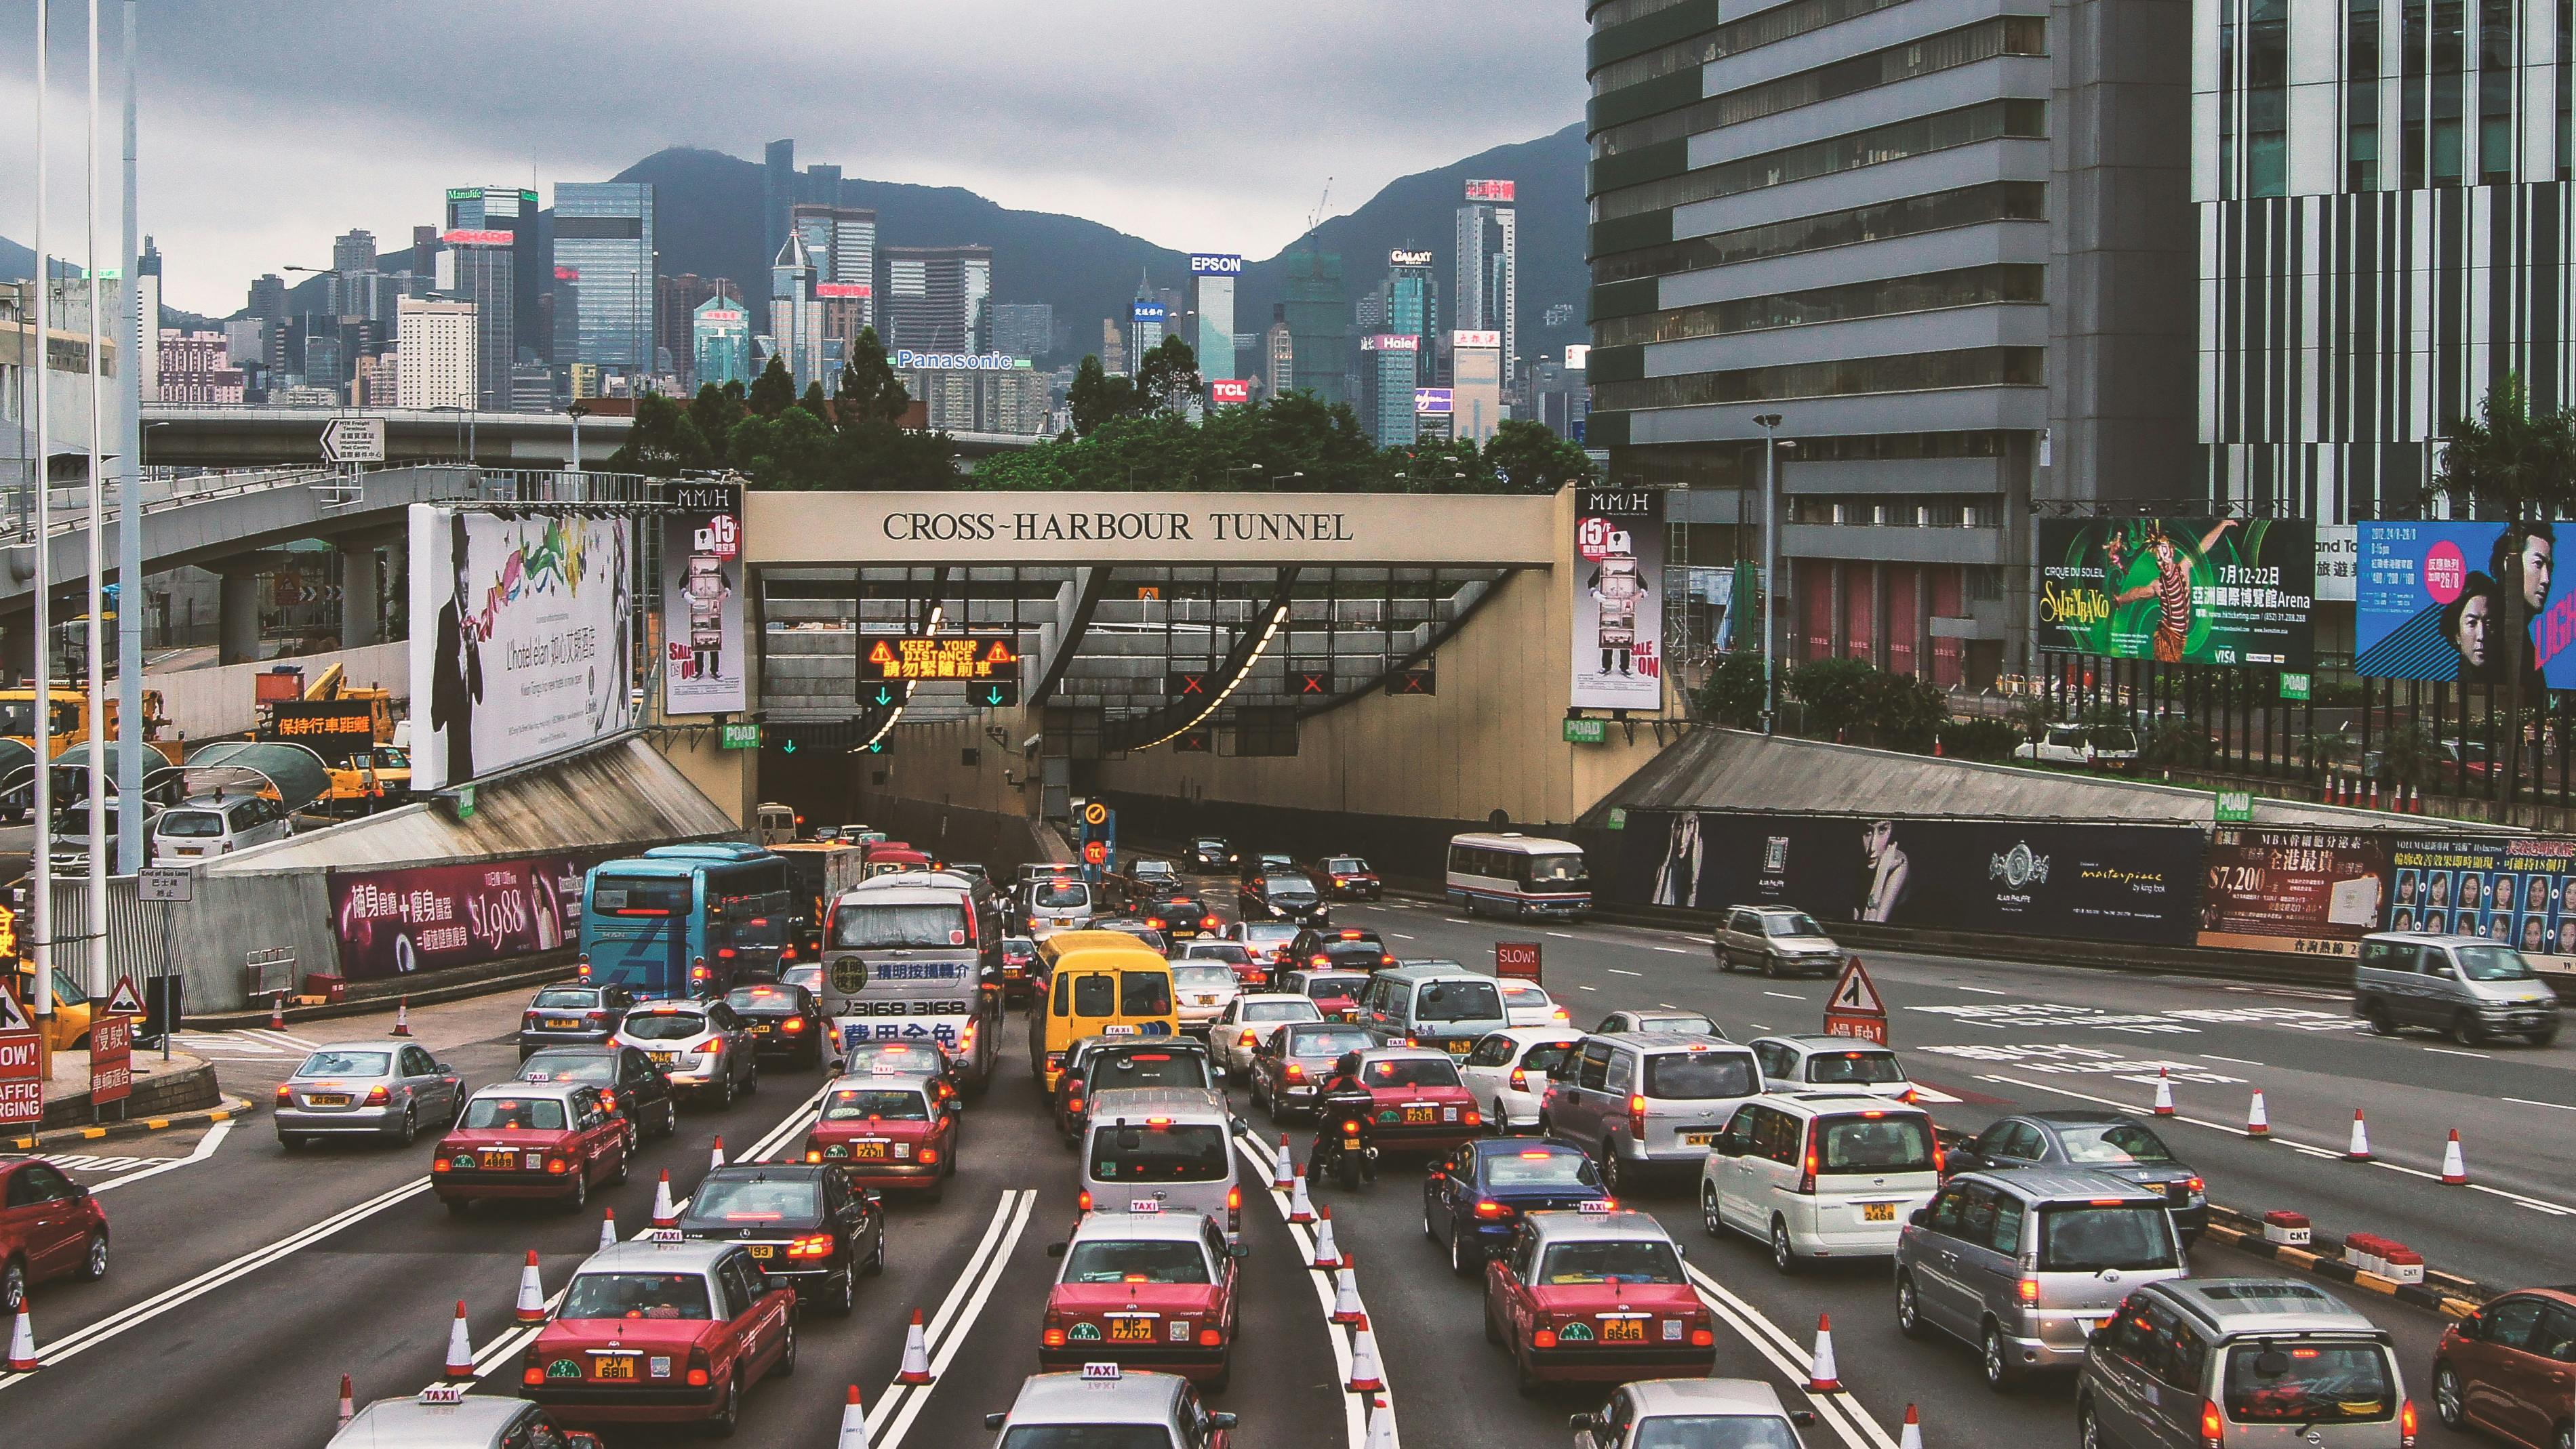 Traffic waits to go through the Cross-Harbour Tunnel in Hong Kong.